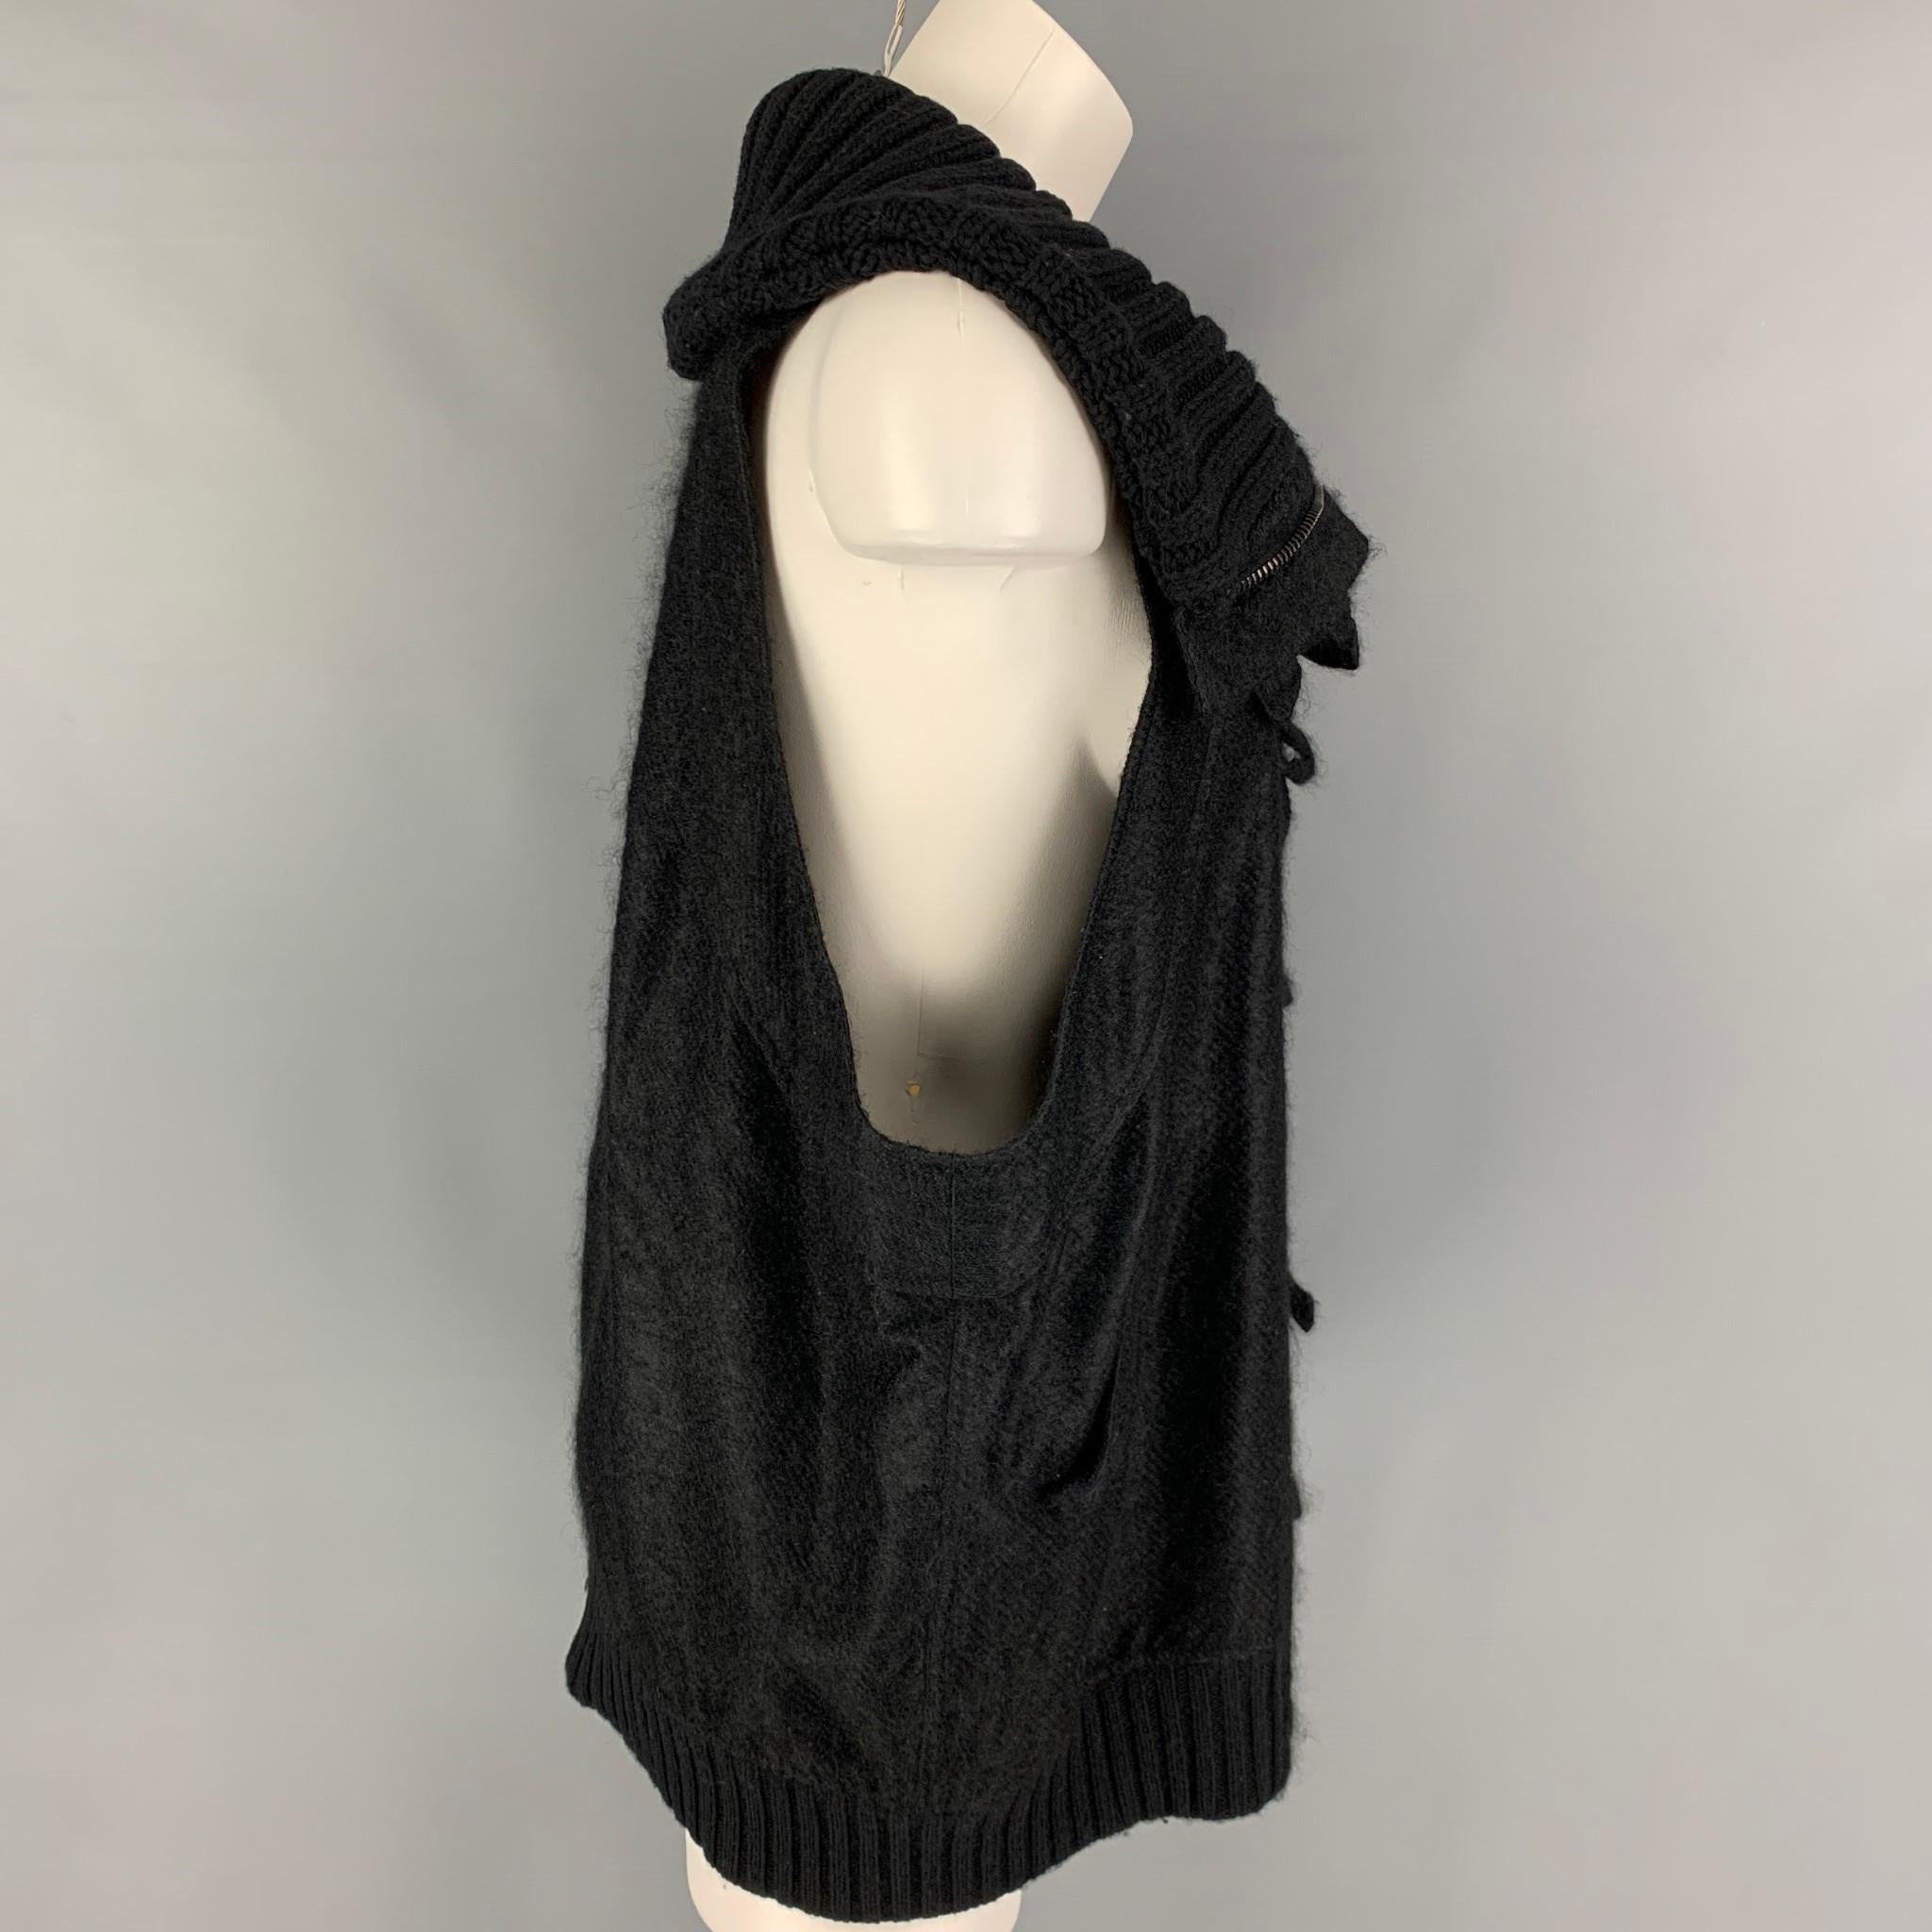 BALENCIAGA vest comes in a black mohair blend featuring a oversized fit, large knitted collar, slit pockets, and a zip & buttoned closure. 

Very Good Pre-Owned Condition.
Marked: 36

Measurements:

Shoulder: 12 in.
Bust: 52 in.
Length: 28 in.